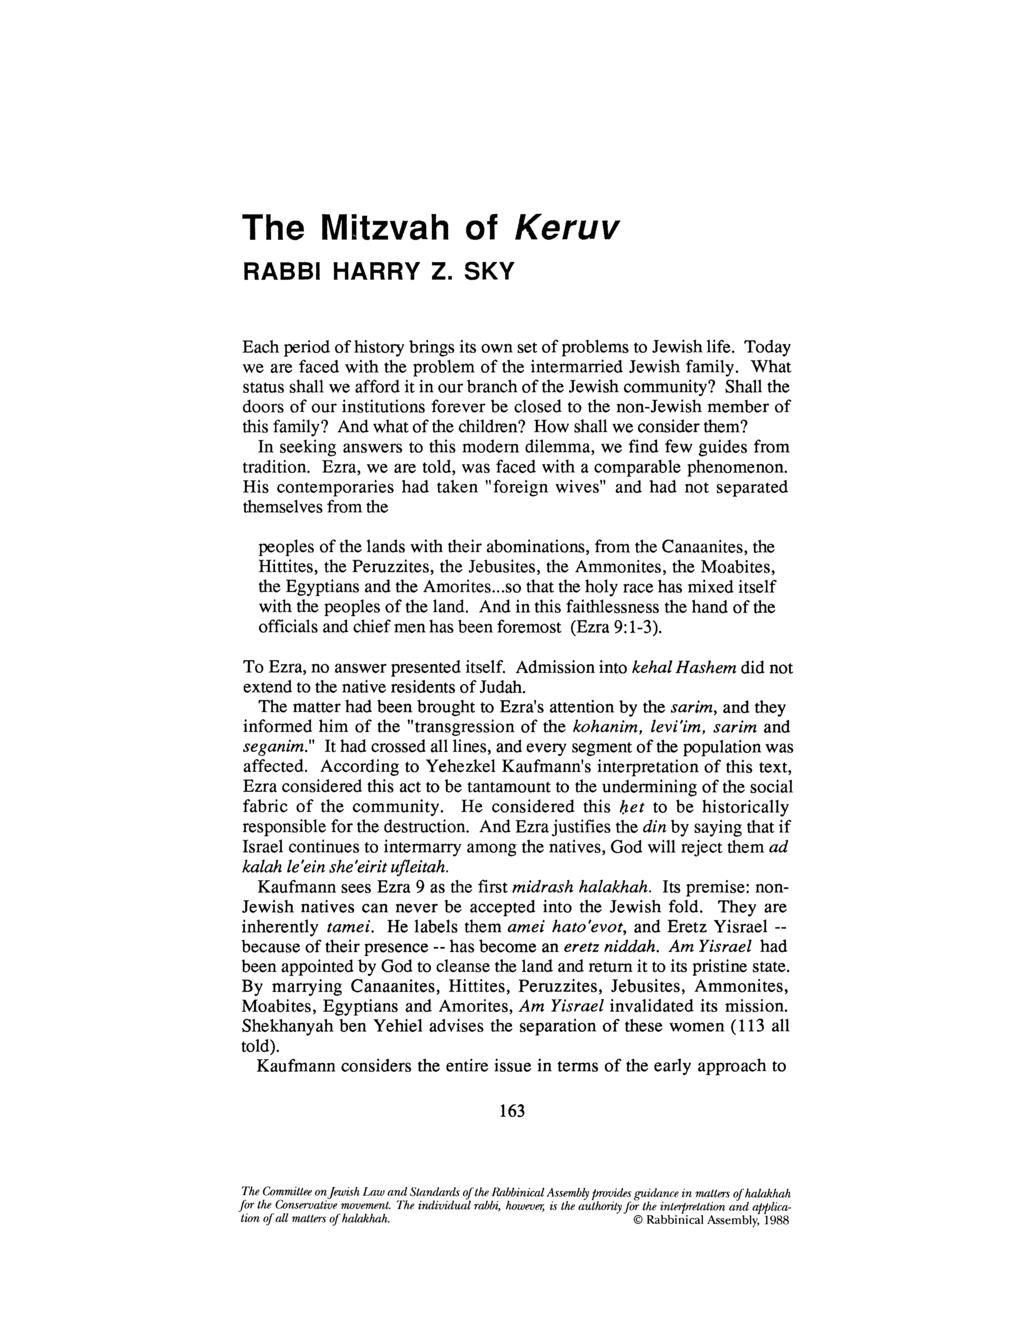 The Mitzvah of Keruv RABBI HARRY Z. SKY Each period of history brings its own set of problems to Jewish life. Today we are faced with the problem of the intermarried Jewish family.